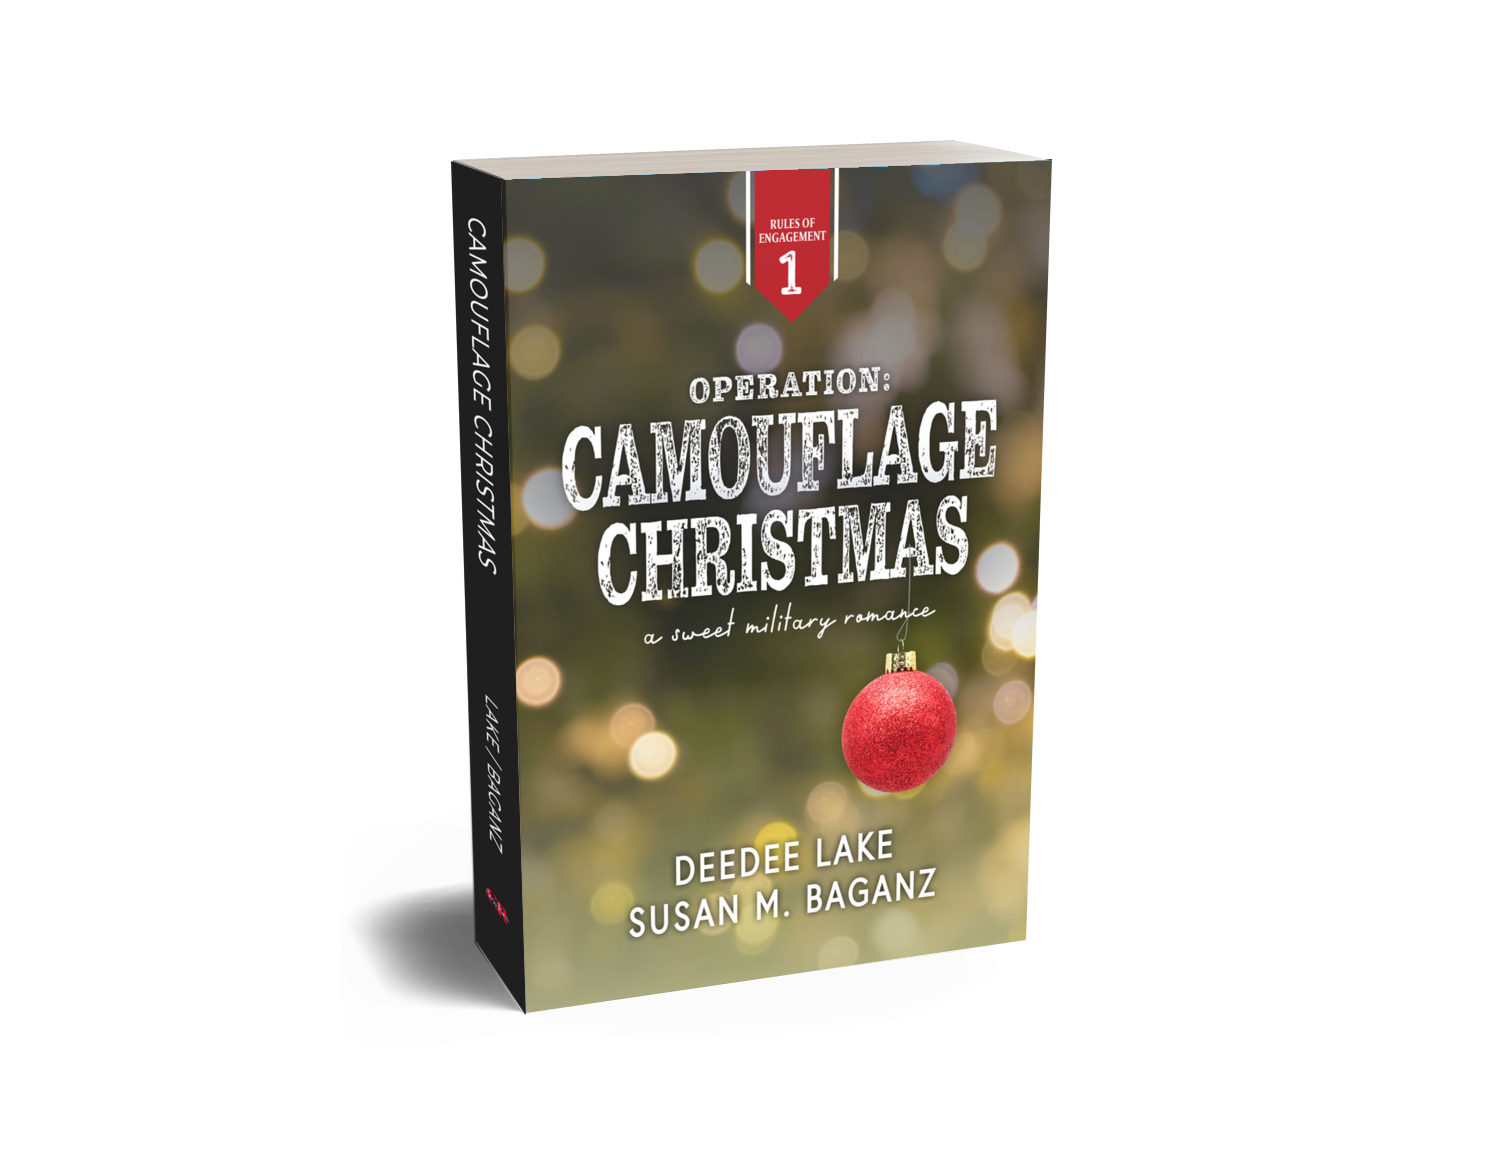 Operation Camouflage Christmas DeeDee Lake Susan Baganz published by Christian publisher CrossRiver Media Group